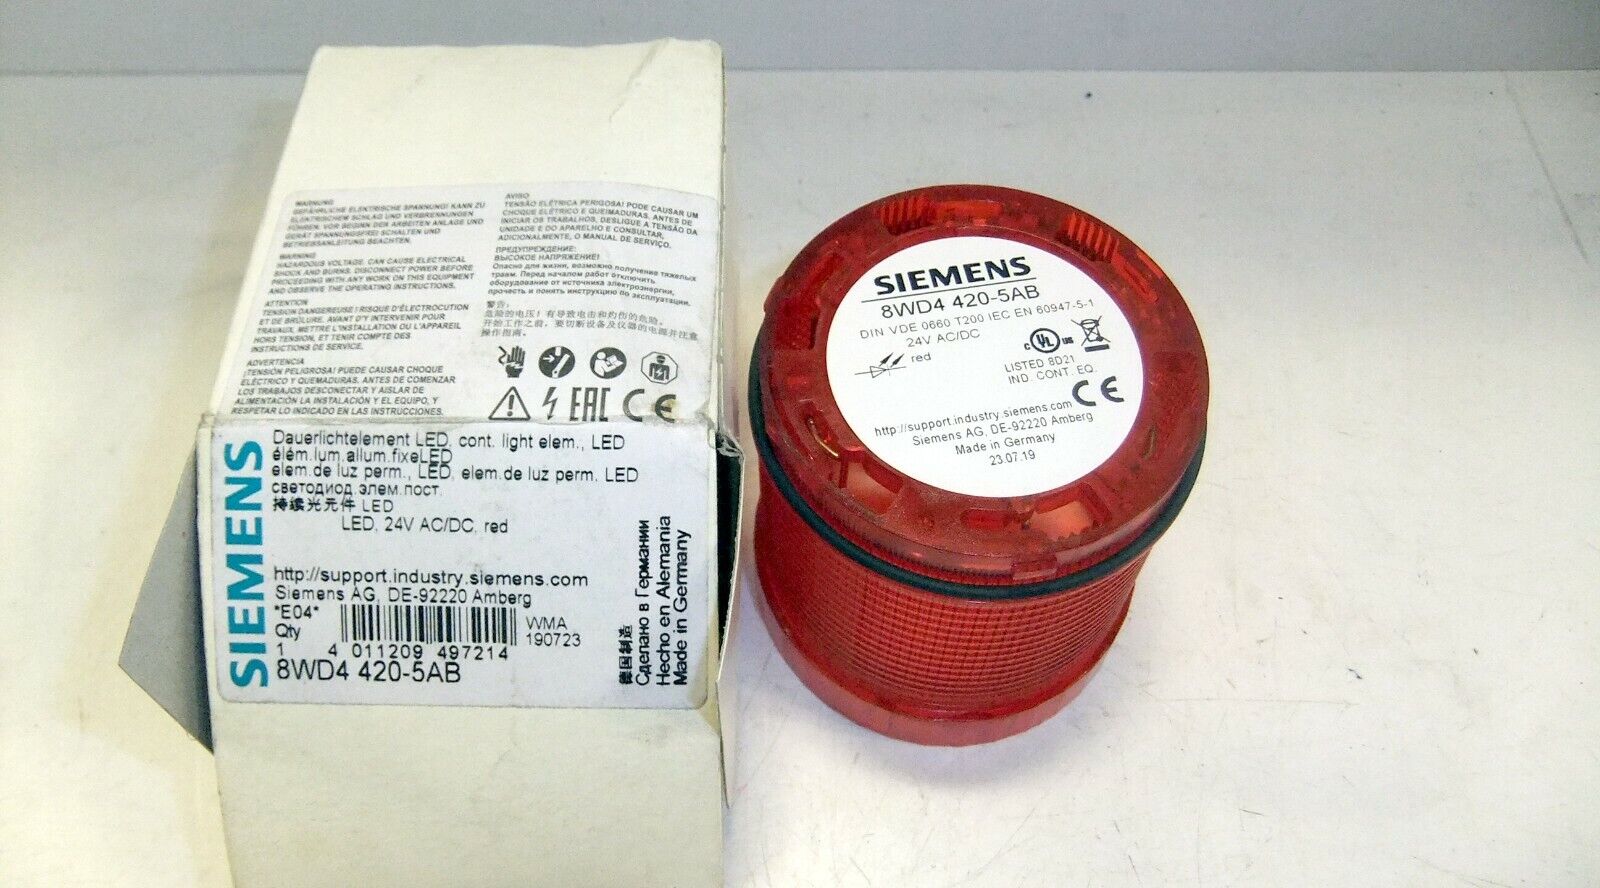 Siemens LED Continuous Light 24V AC/DC 8WD4 420-5AB RED